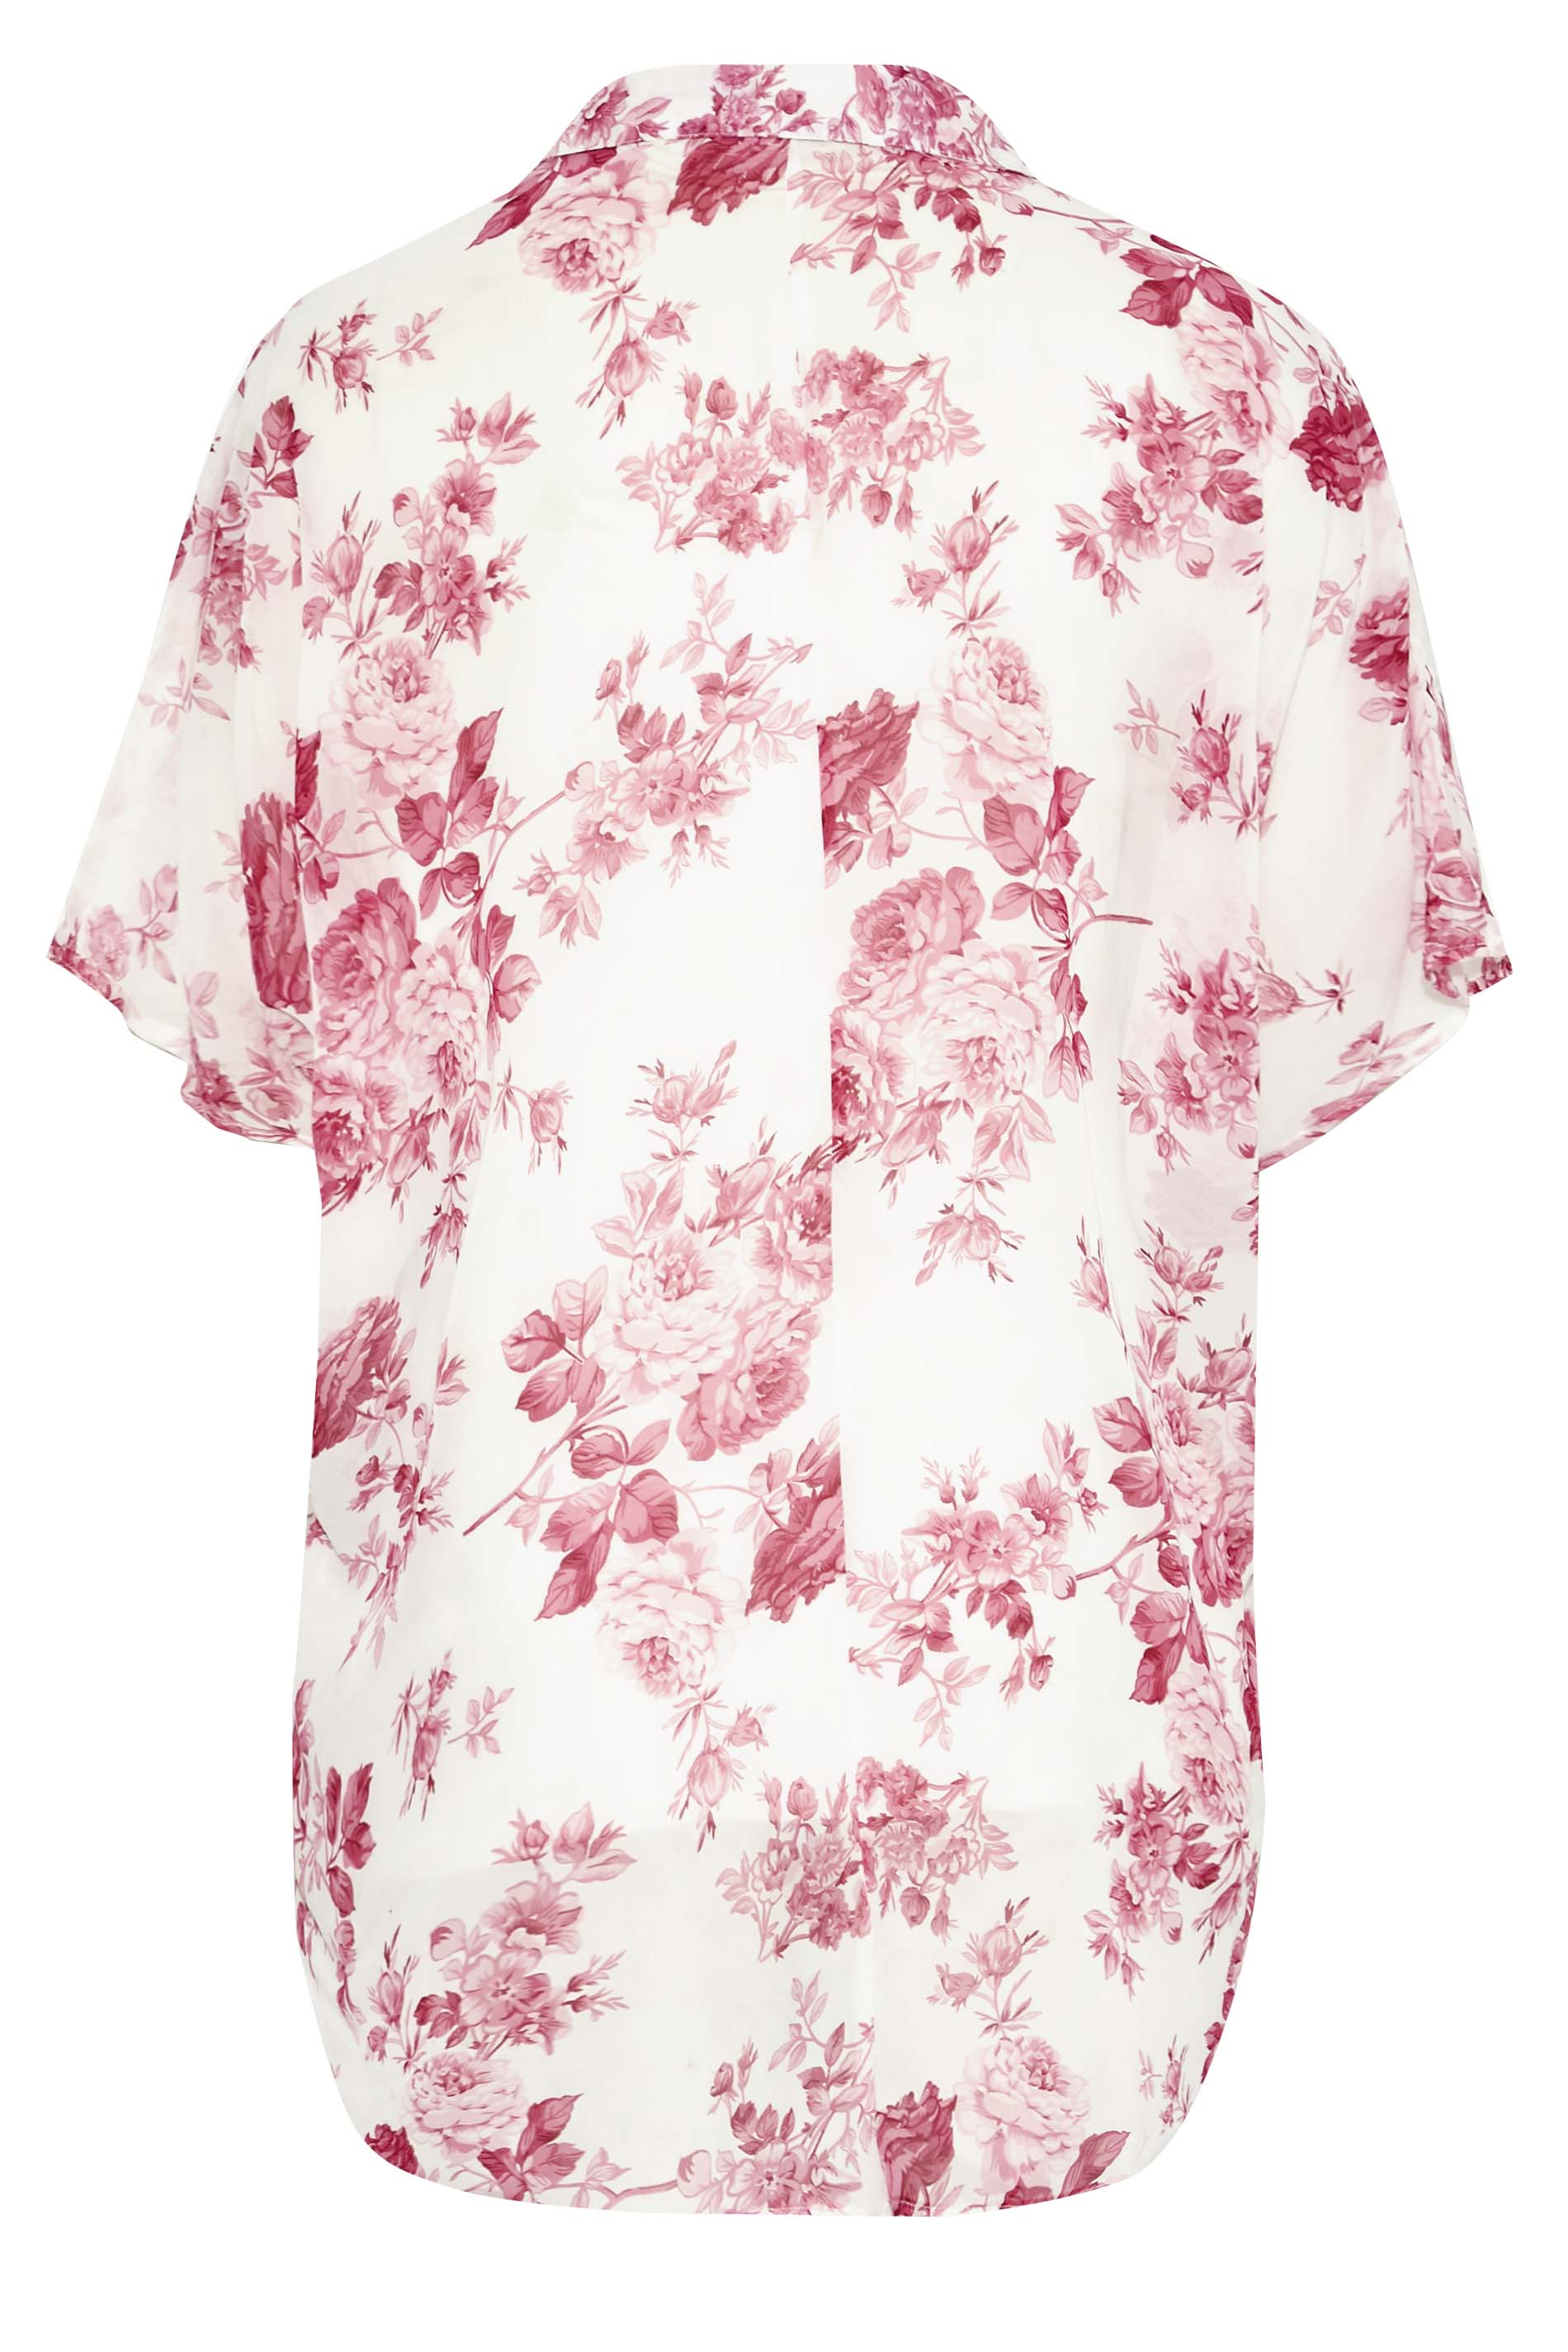 Grande taille  Blouses & Chemisiers Grande taille  Chemisiers | Curve Pink Floral Print Batwing Shirt - EH92319